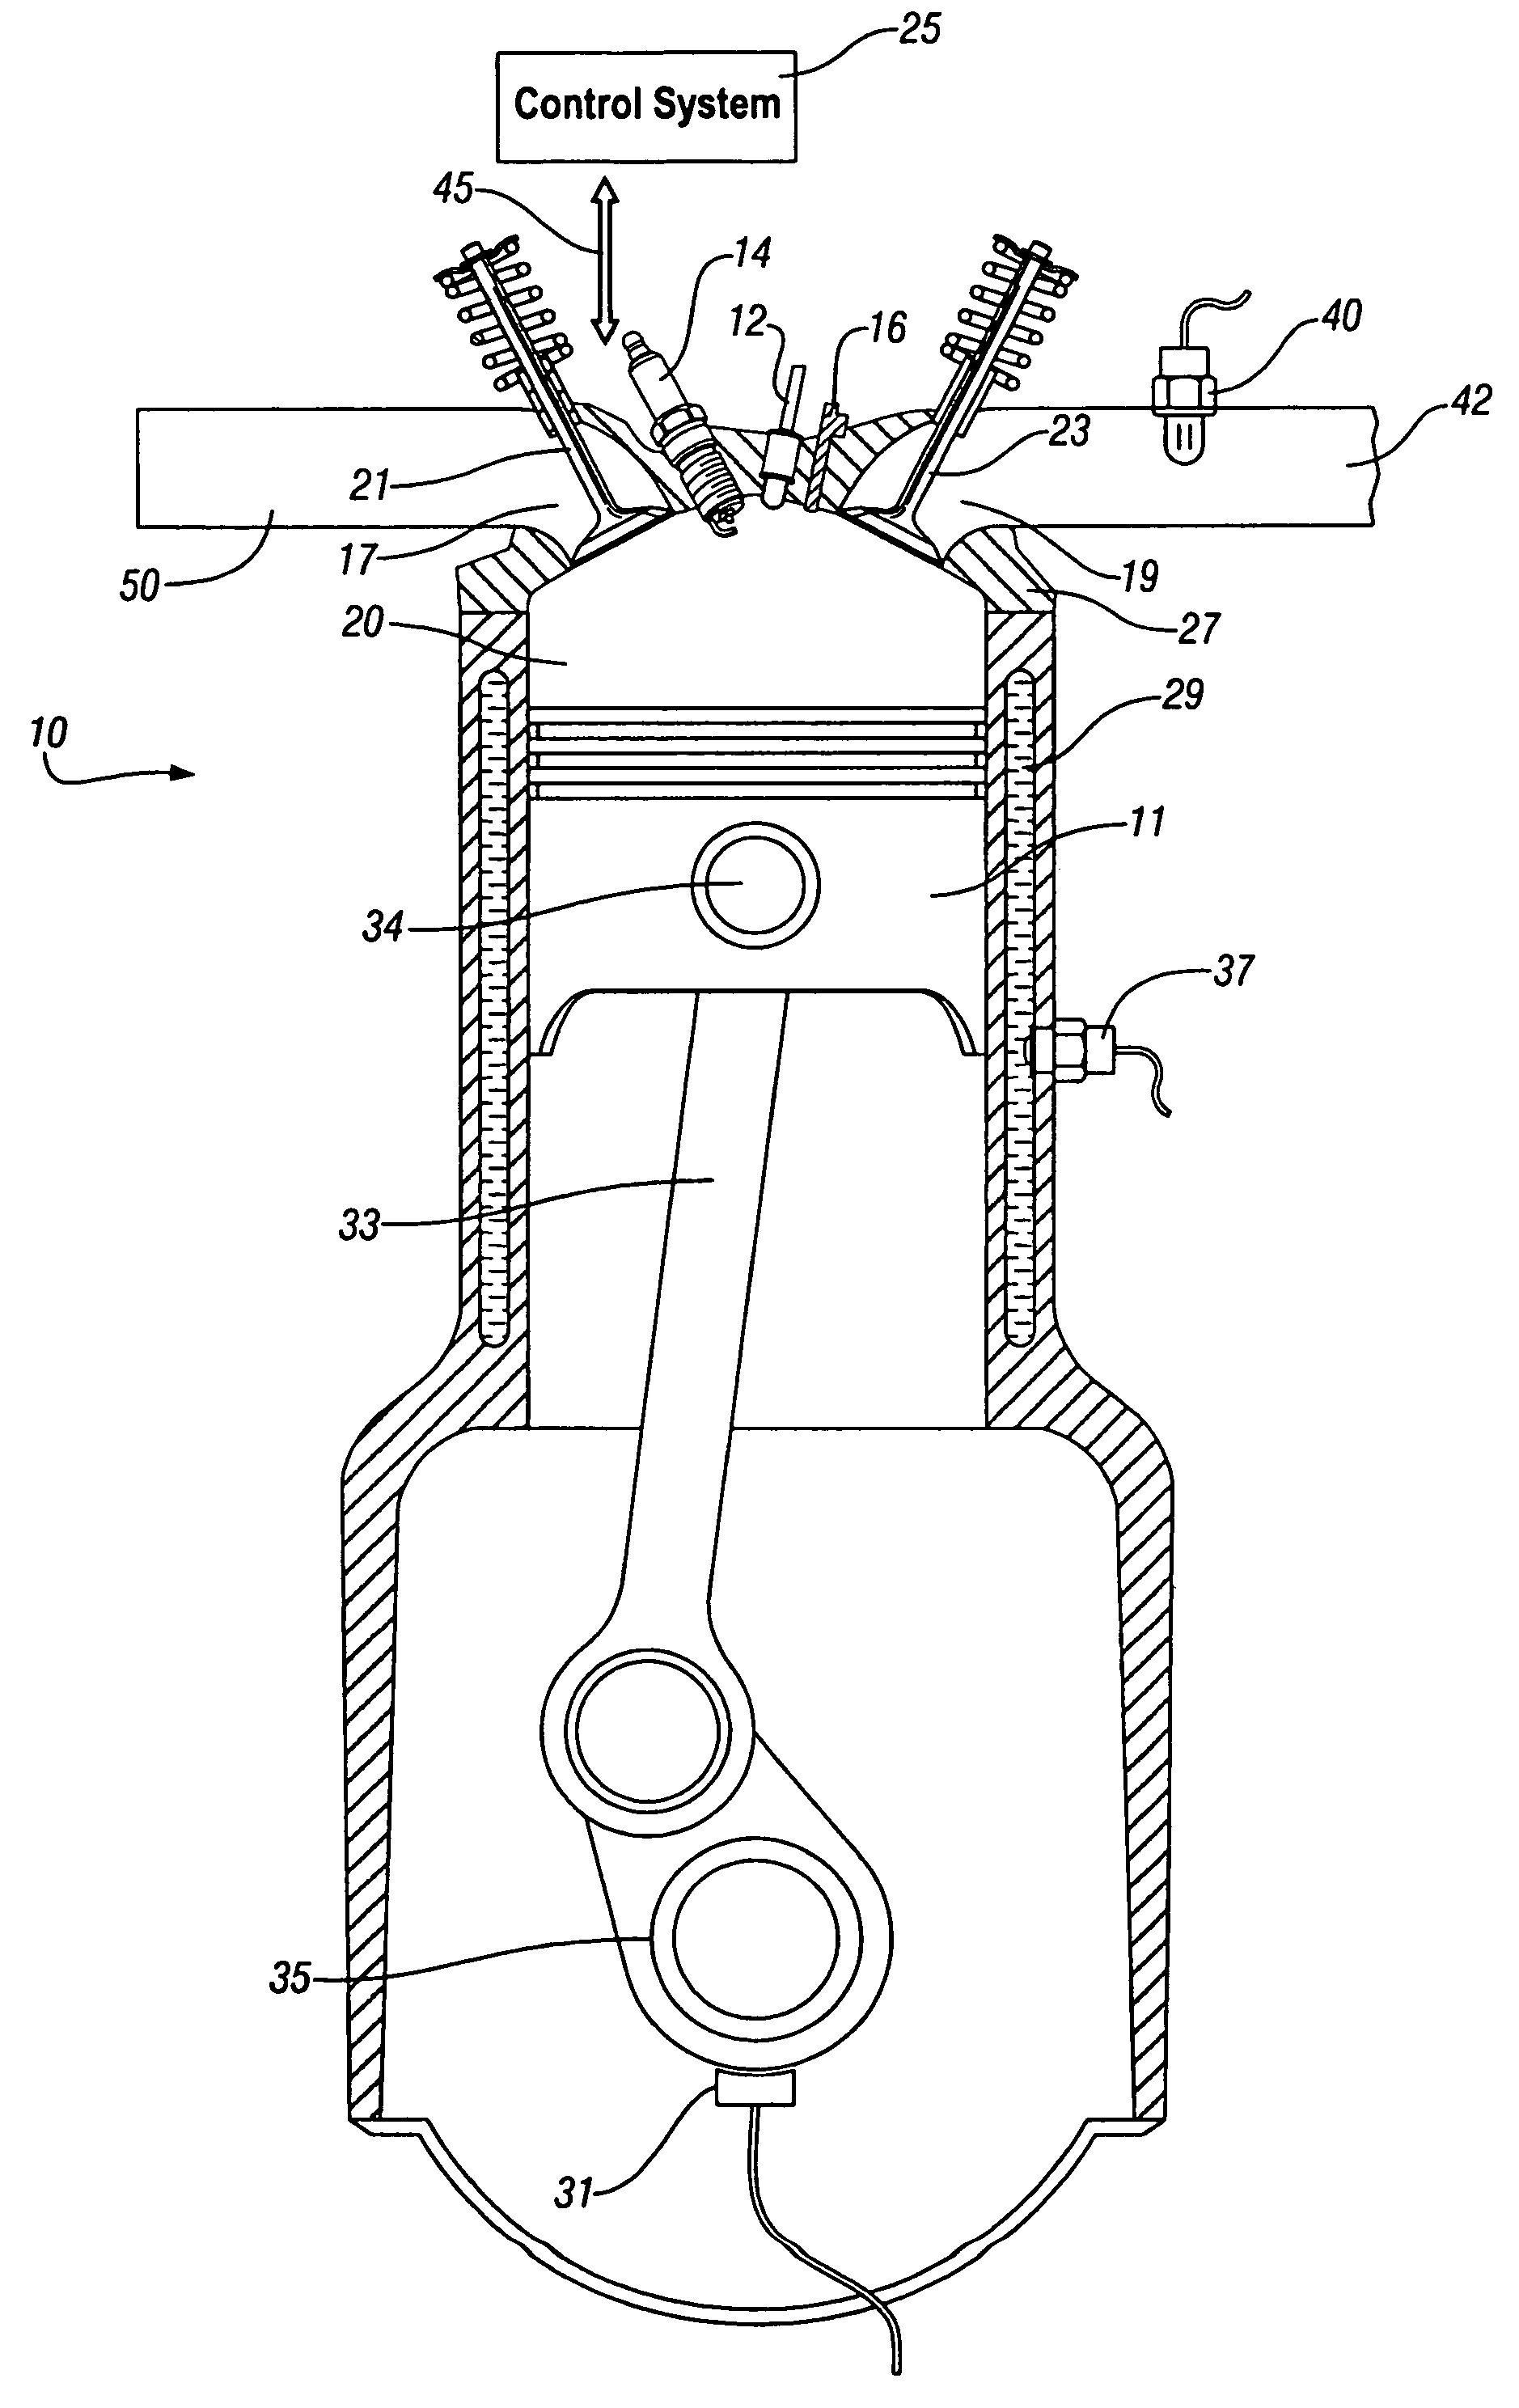 Method and apparatus to determine magnitude of combustion chamber deposits